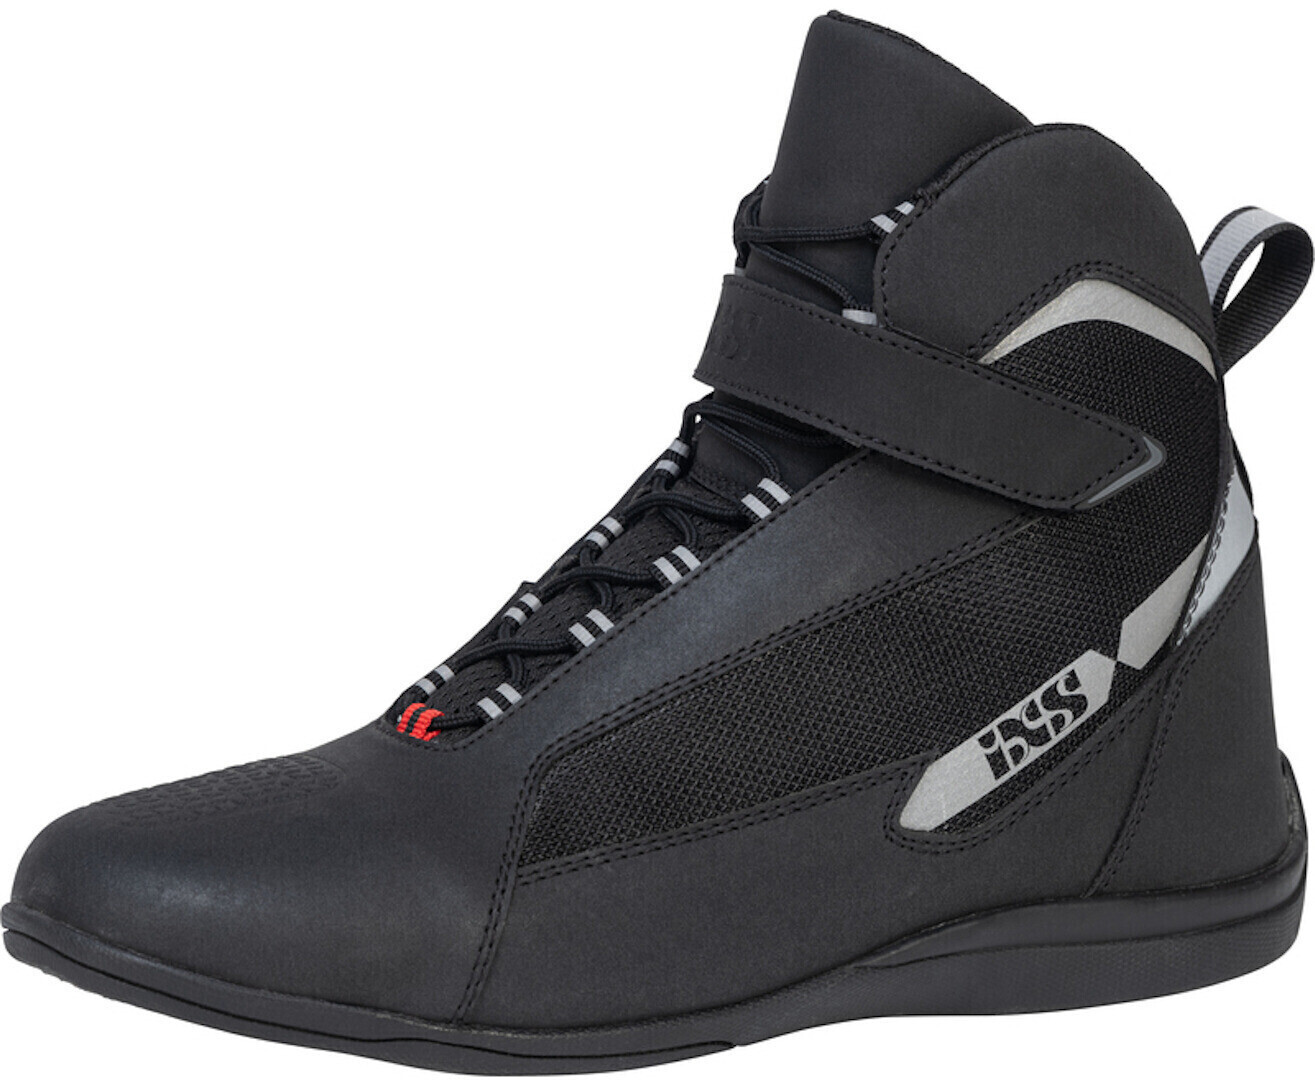 Photos - Motorcycle Boots IXS Evo-Air boots black 